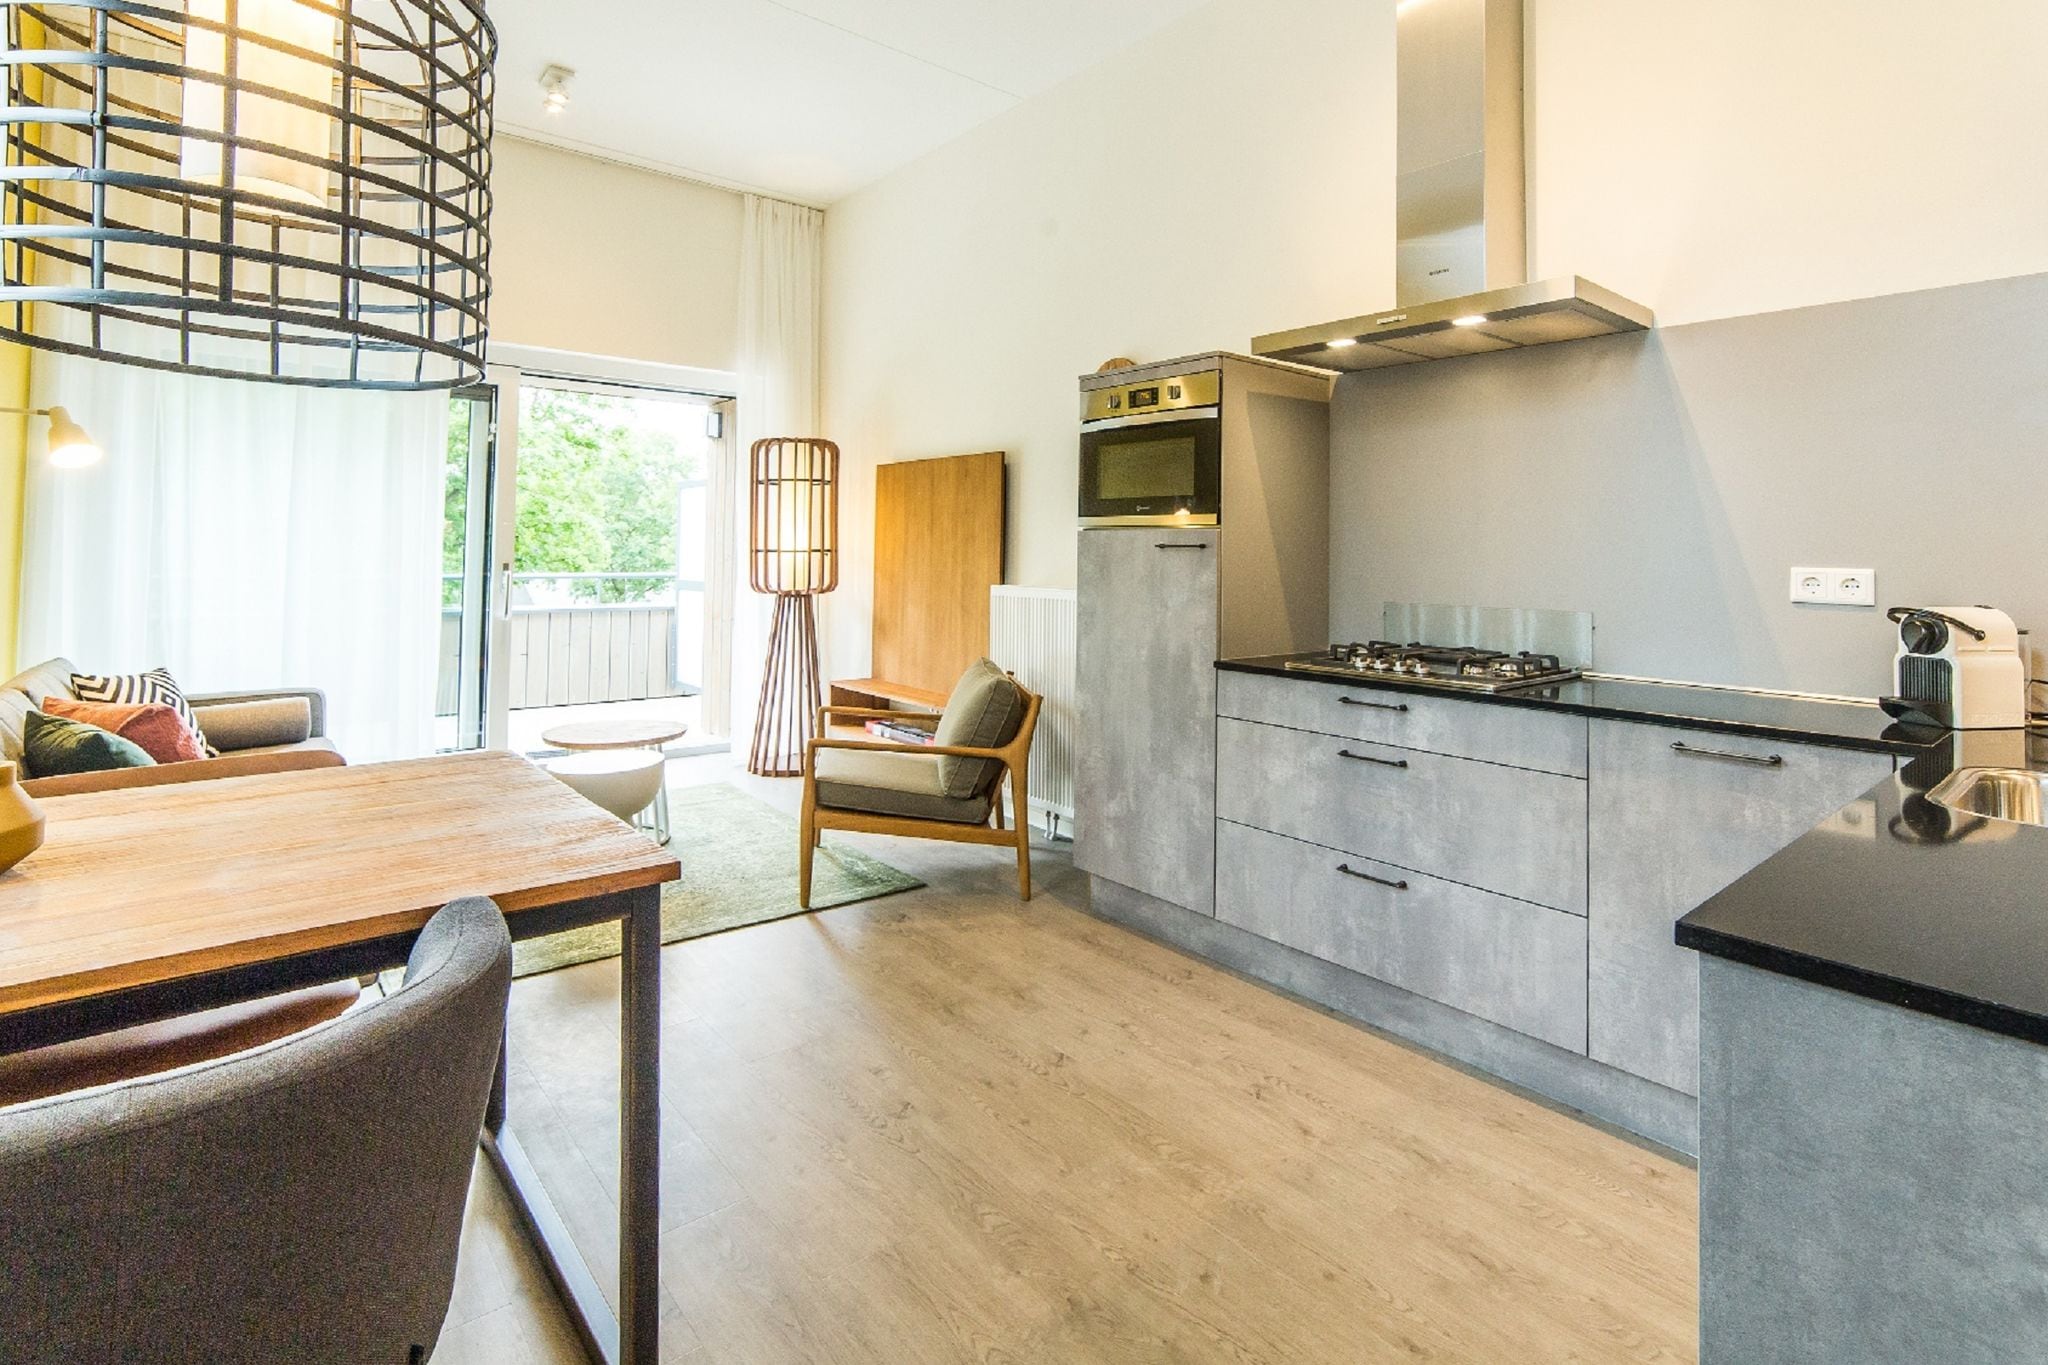 Modern apartment, just 4 km. from Maastricht